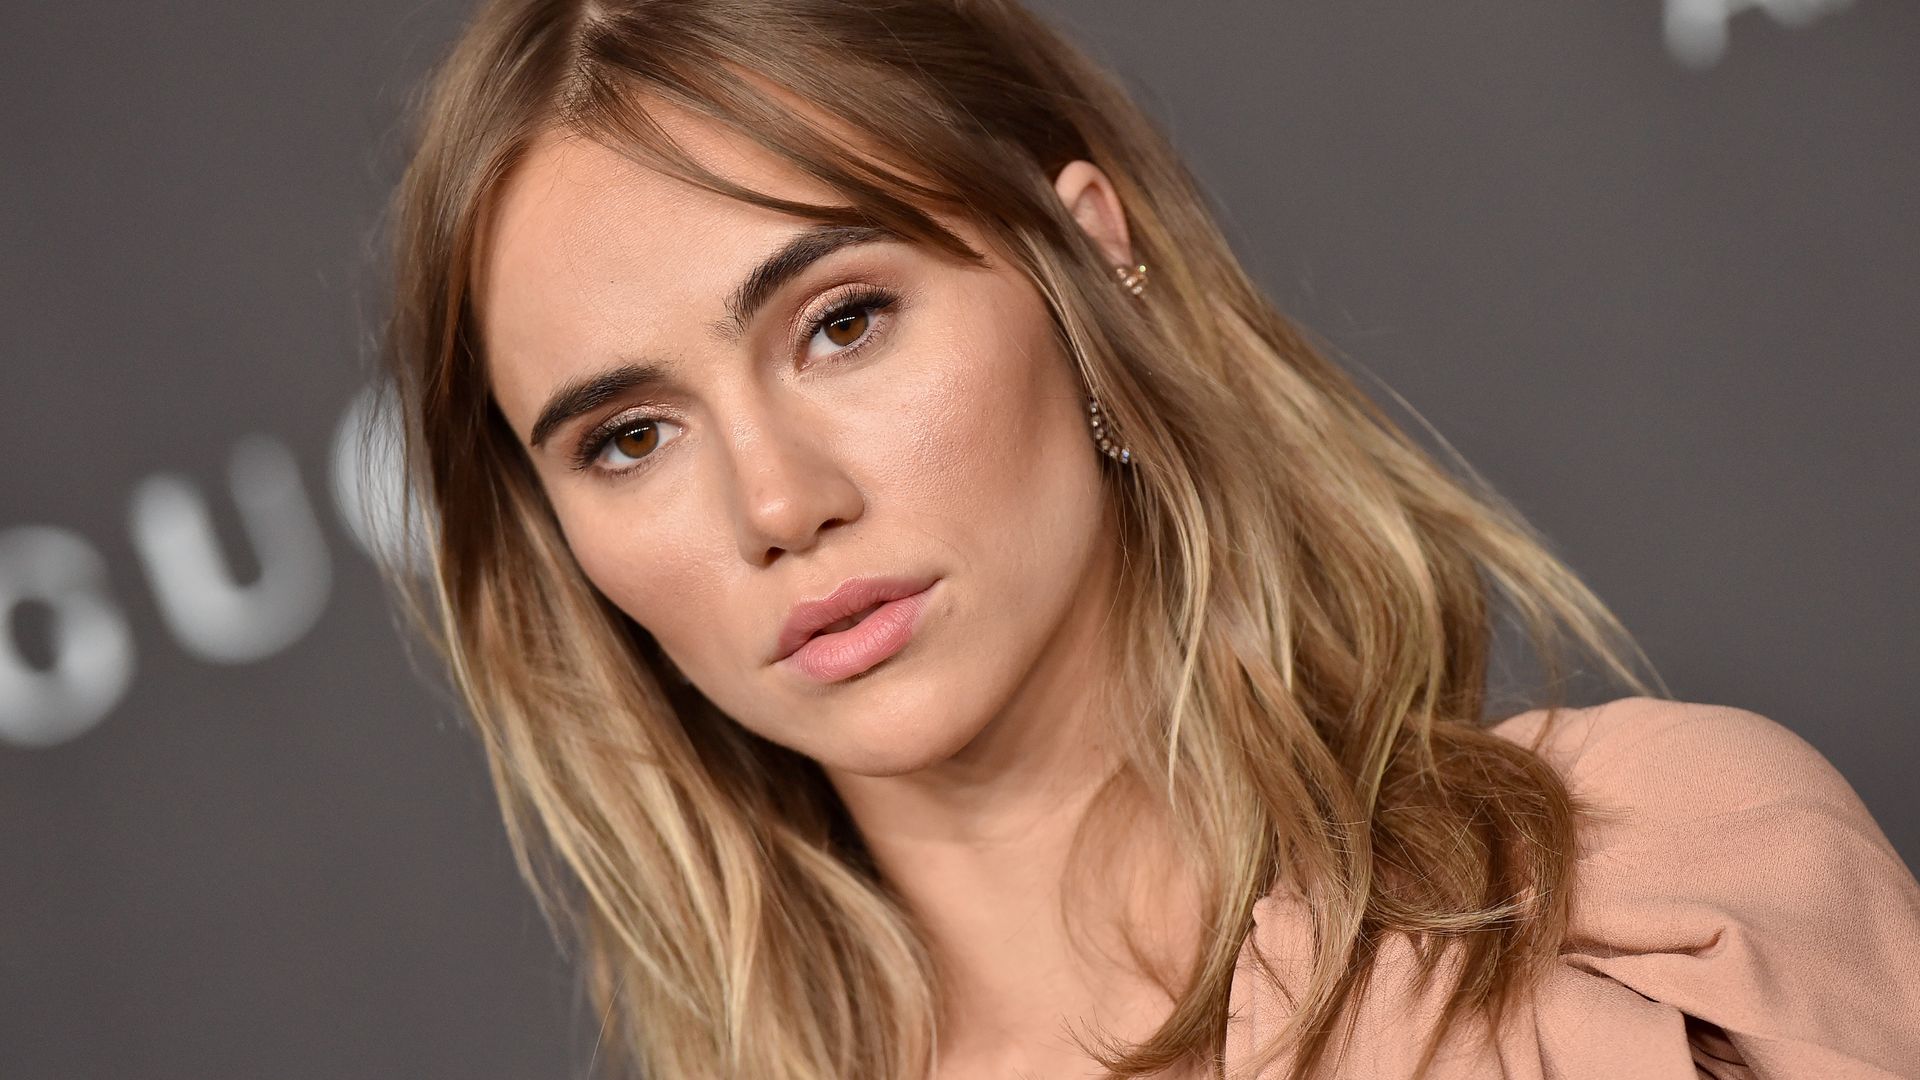 LOS ANGELES, CALIFORNIA - NOVEMBER 02: Suki Waterhouse attends the 2019 LACMA Art + Film Gala Presented By Gucci on November 02, 2019 in Los Angeles, California. (Photo by Axelle/Bauer-Griffin/FilmMagic)